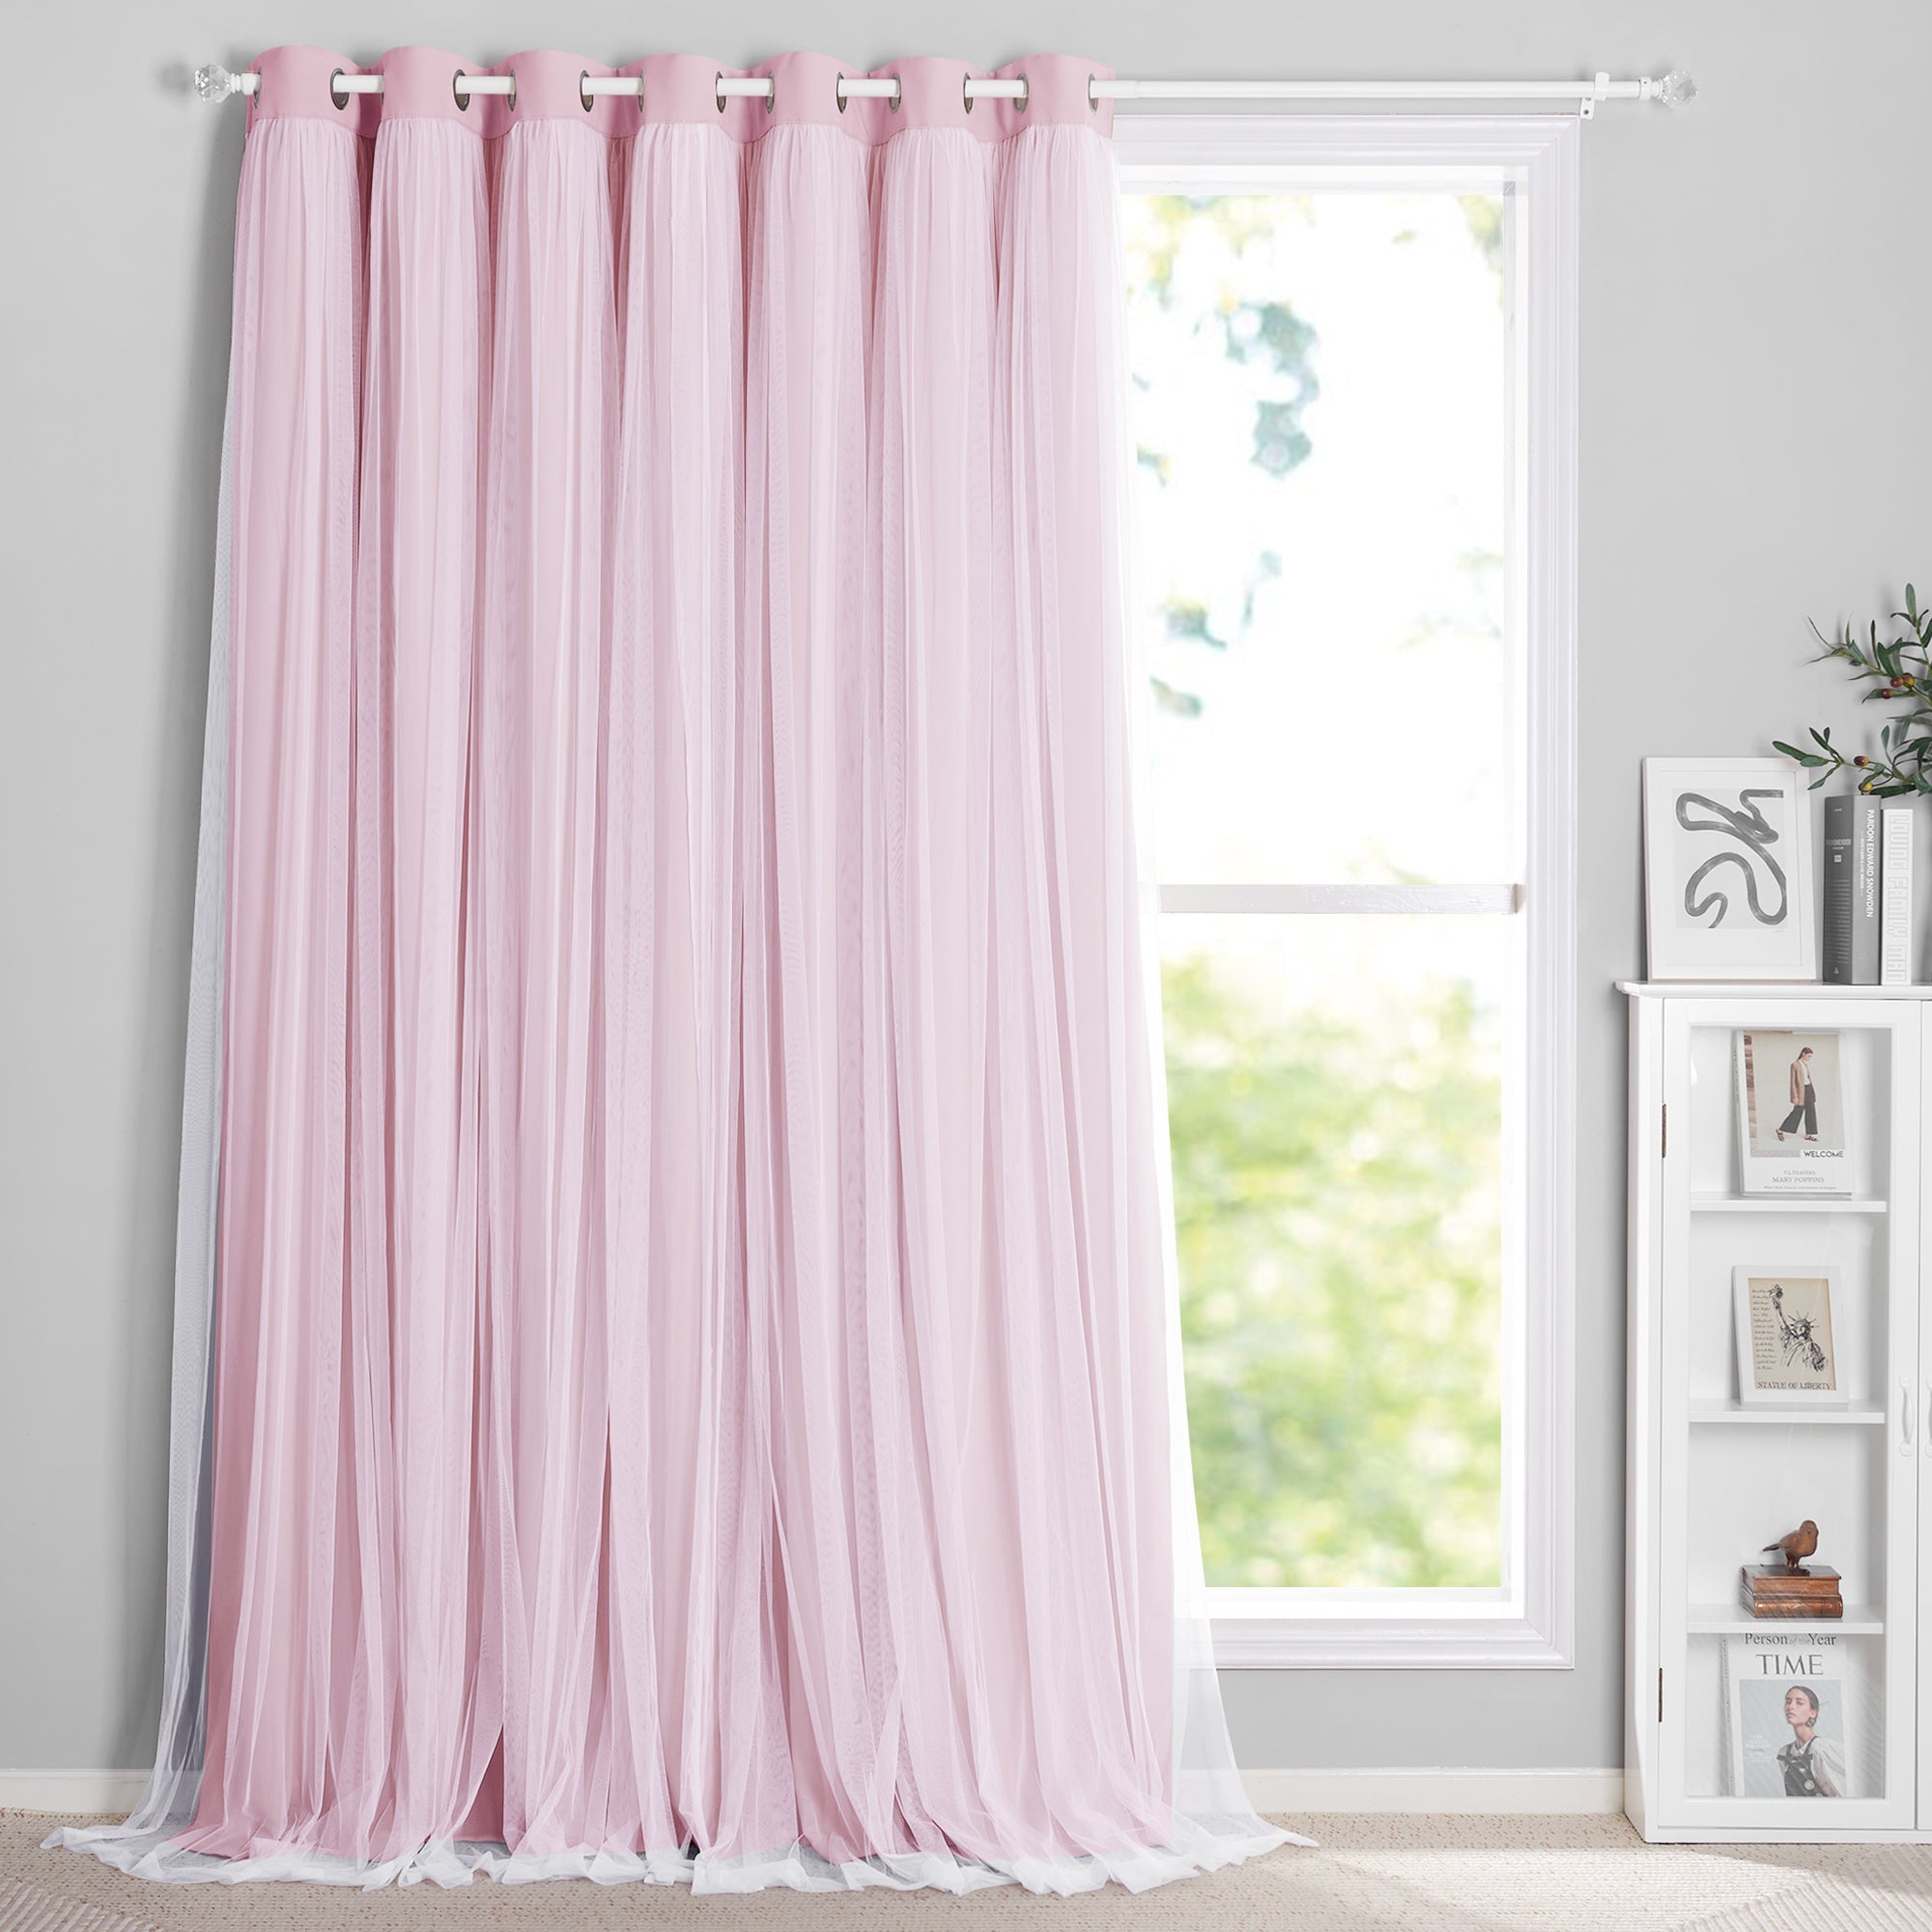 Blackout Woven Curtain With Crushed Voile Sheer Curtain Overlay 1 Panel KGORGE Store